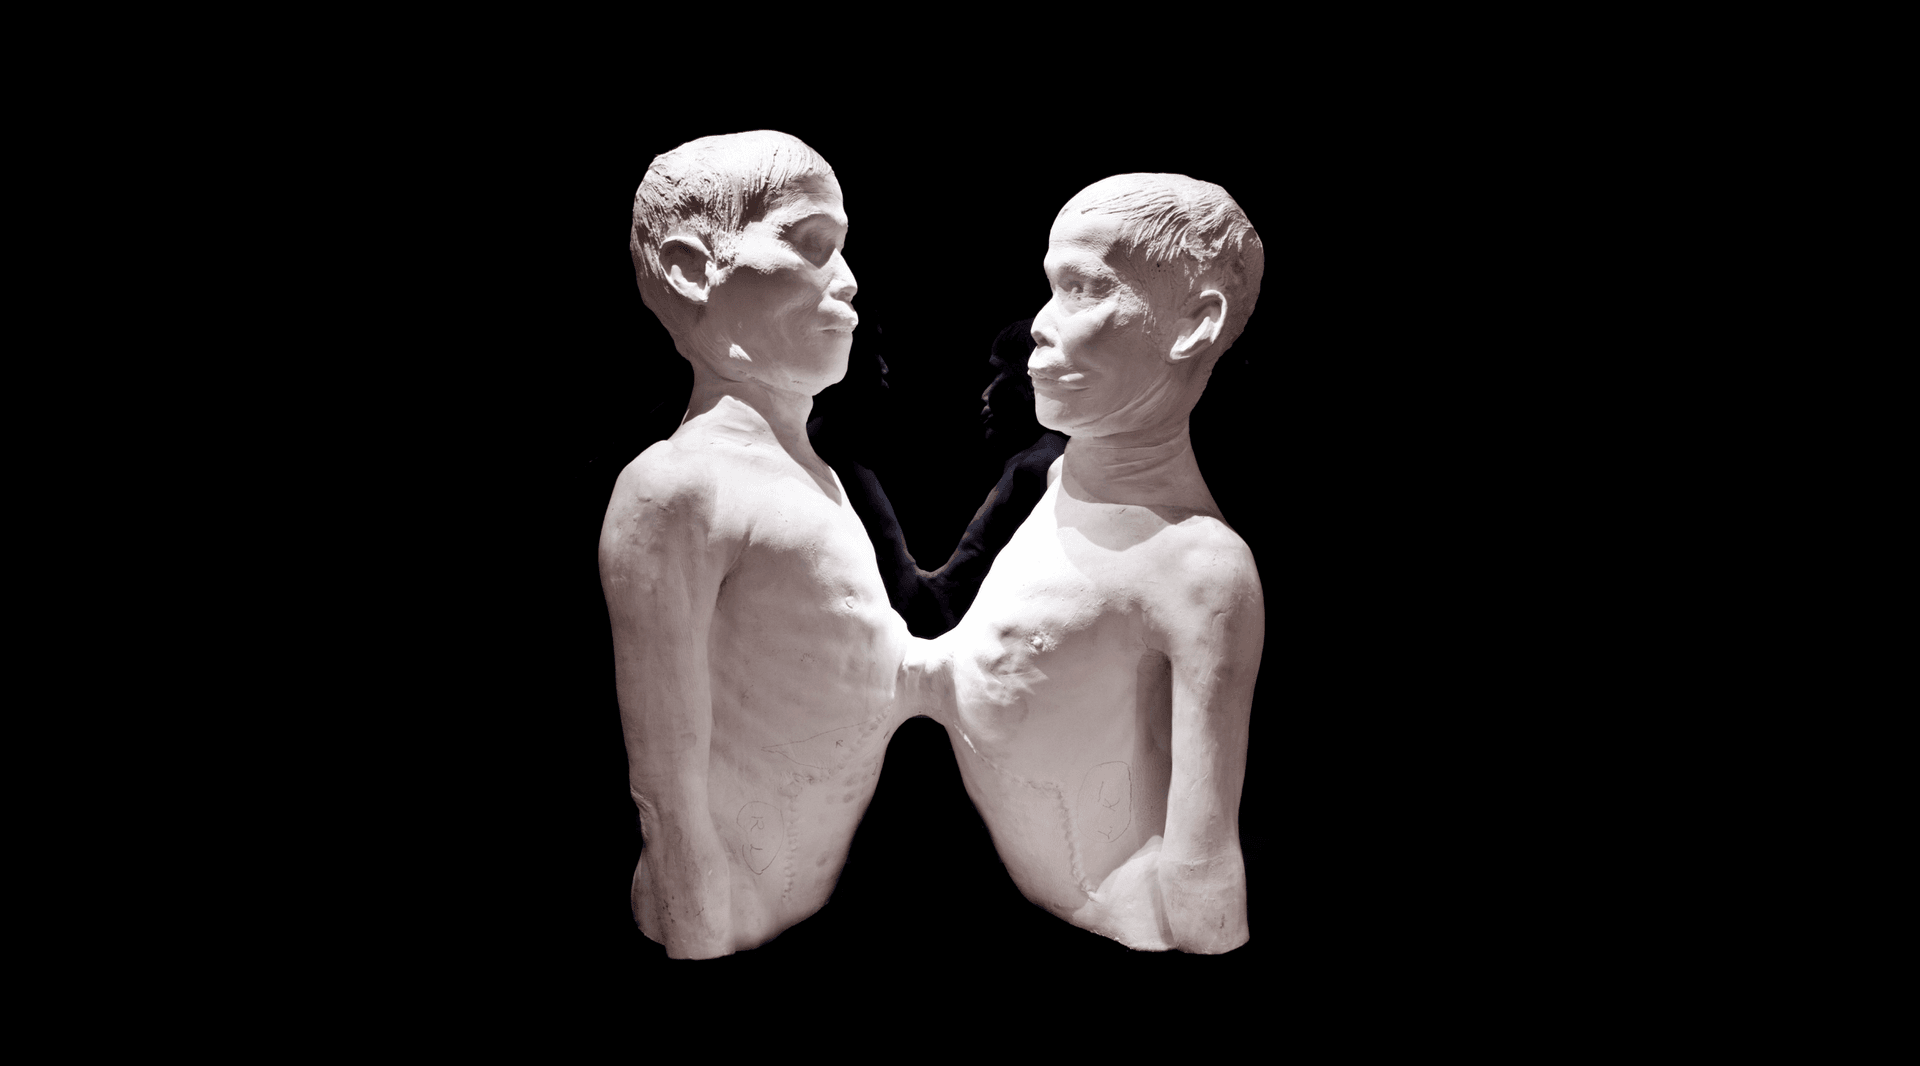 White casts of two men conjoined at the torso on a black background